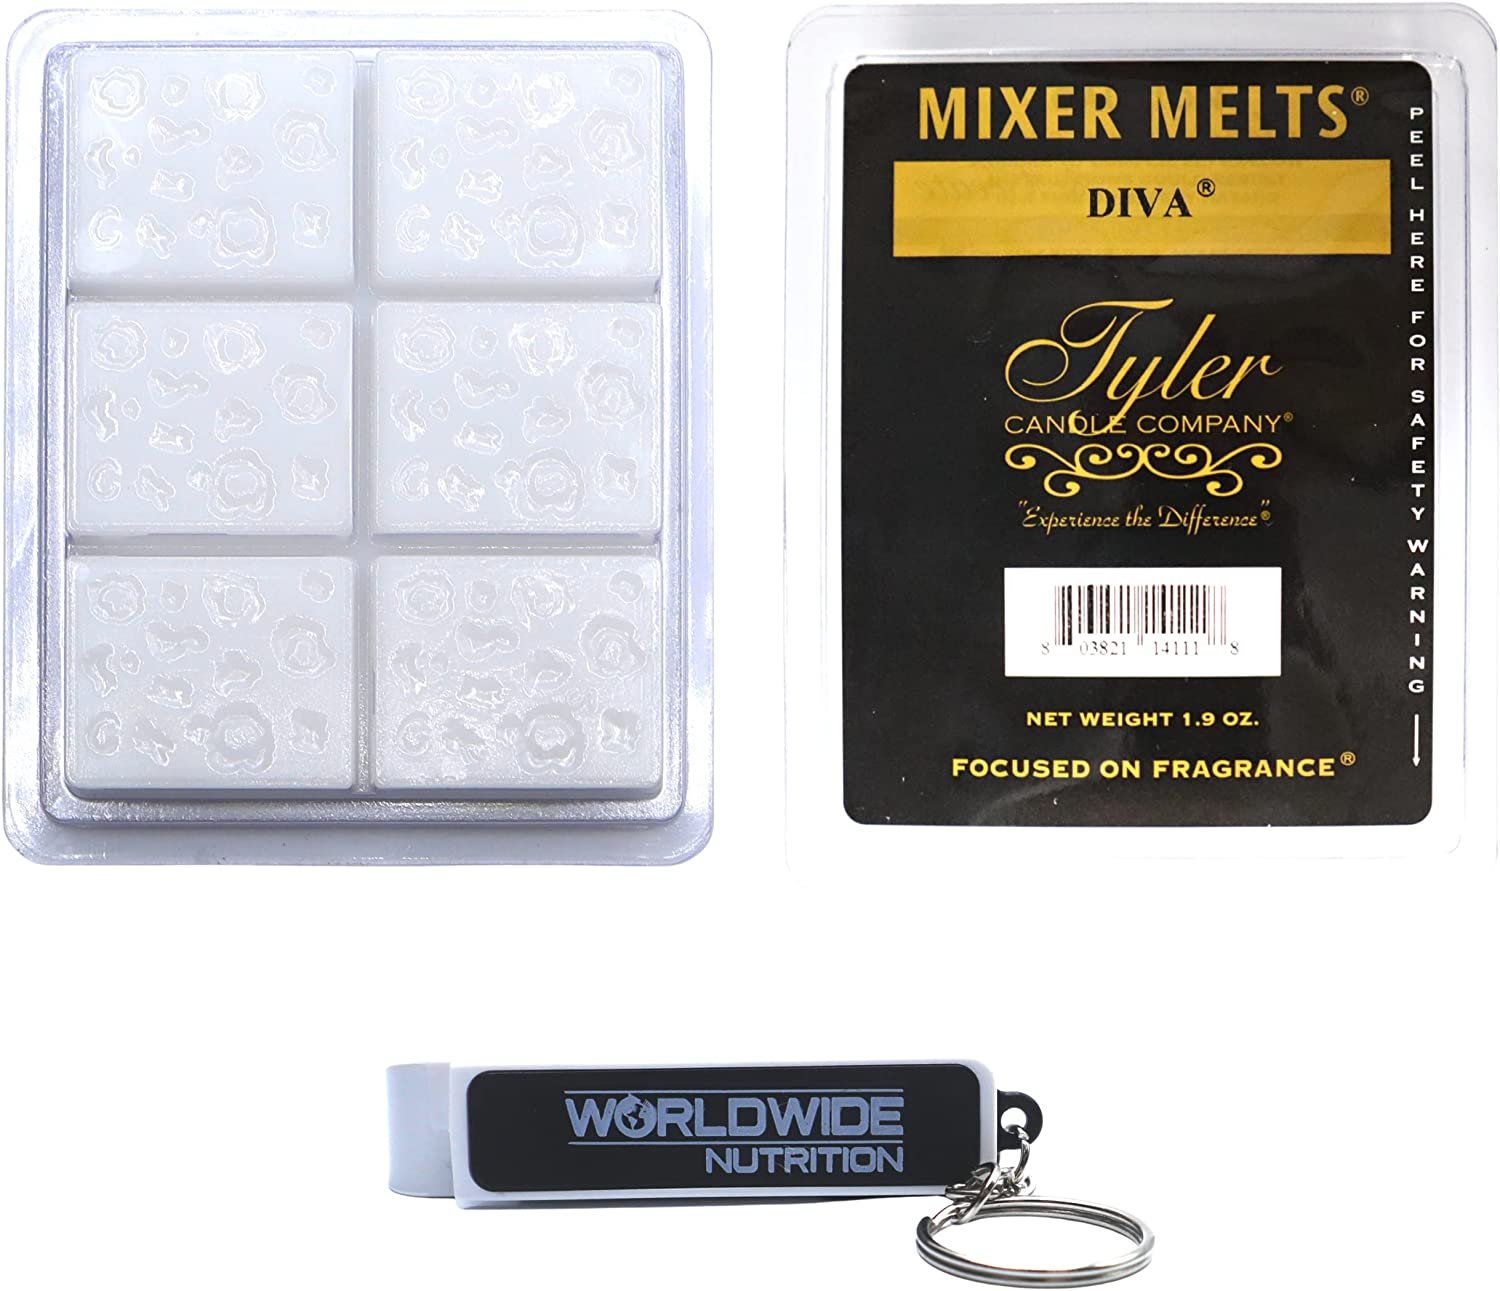 Tyler Candle Company Diva Scent Wax Melts - Scented Mixer Melts with Essential Oils for Wax Warmer - Pack of 4, 6 Bars per with Worldwide Nutrition Multi Purpose Key Chain